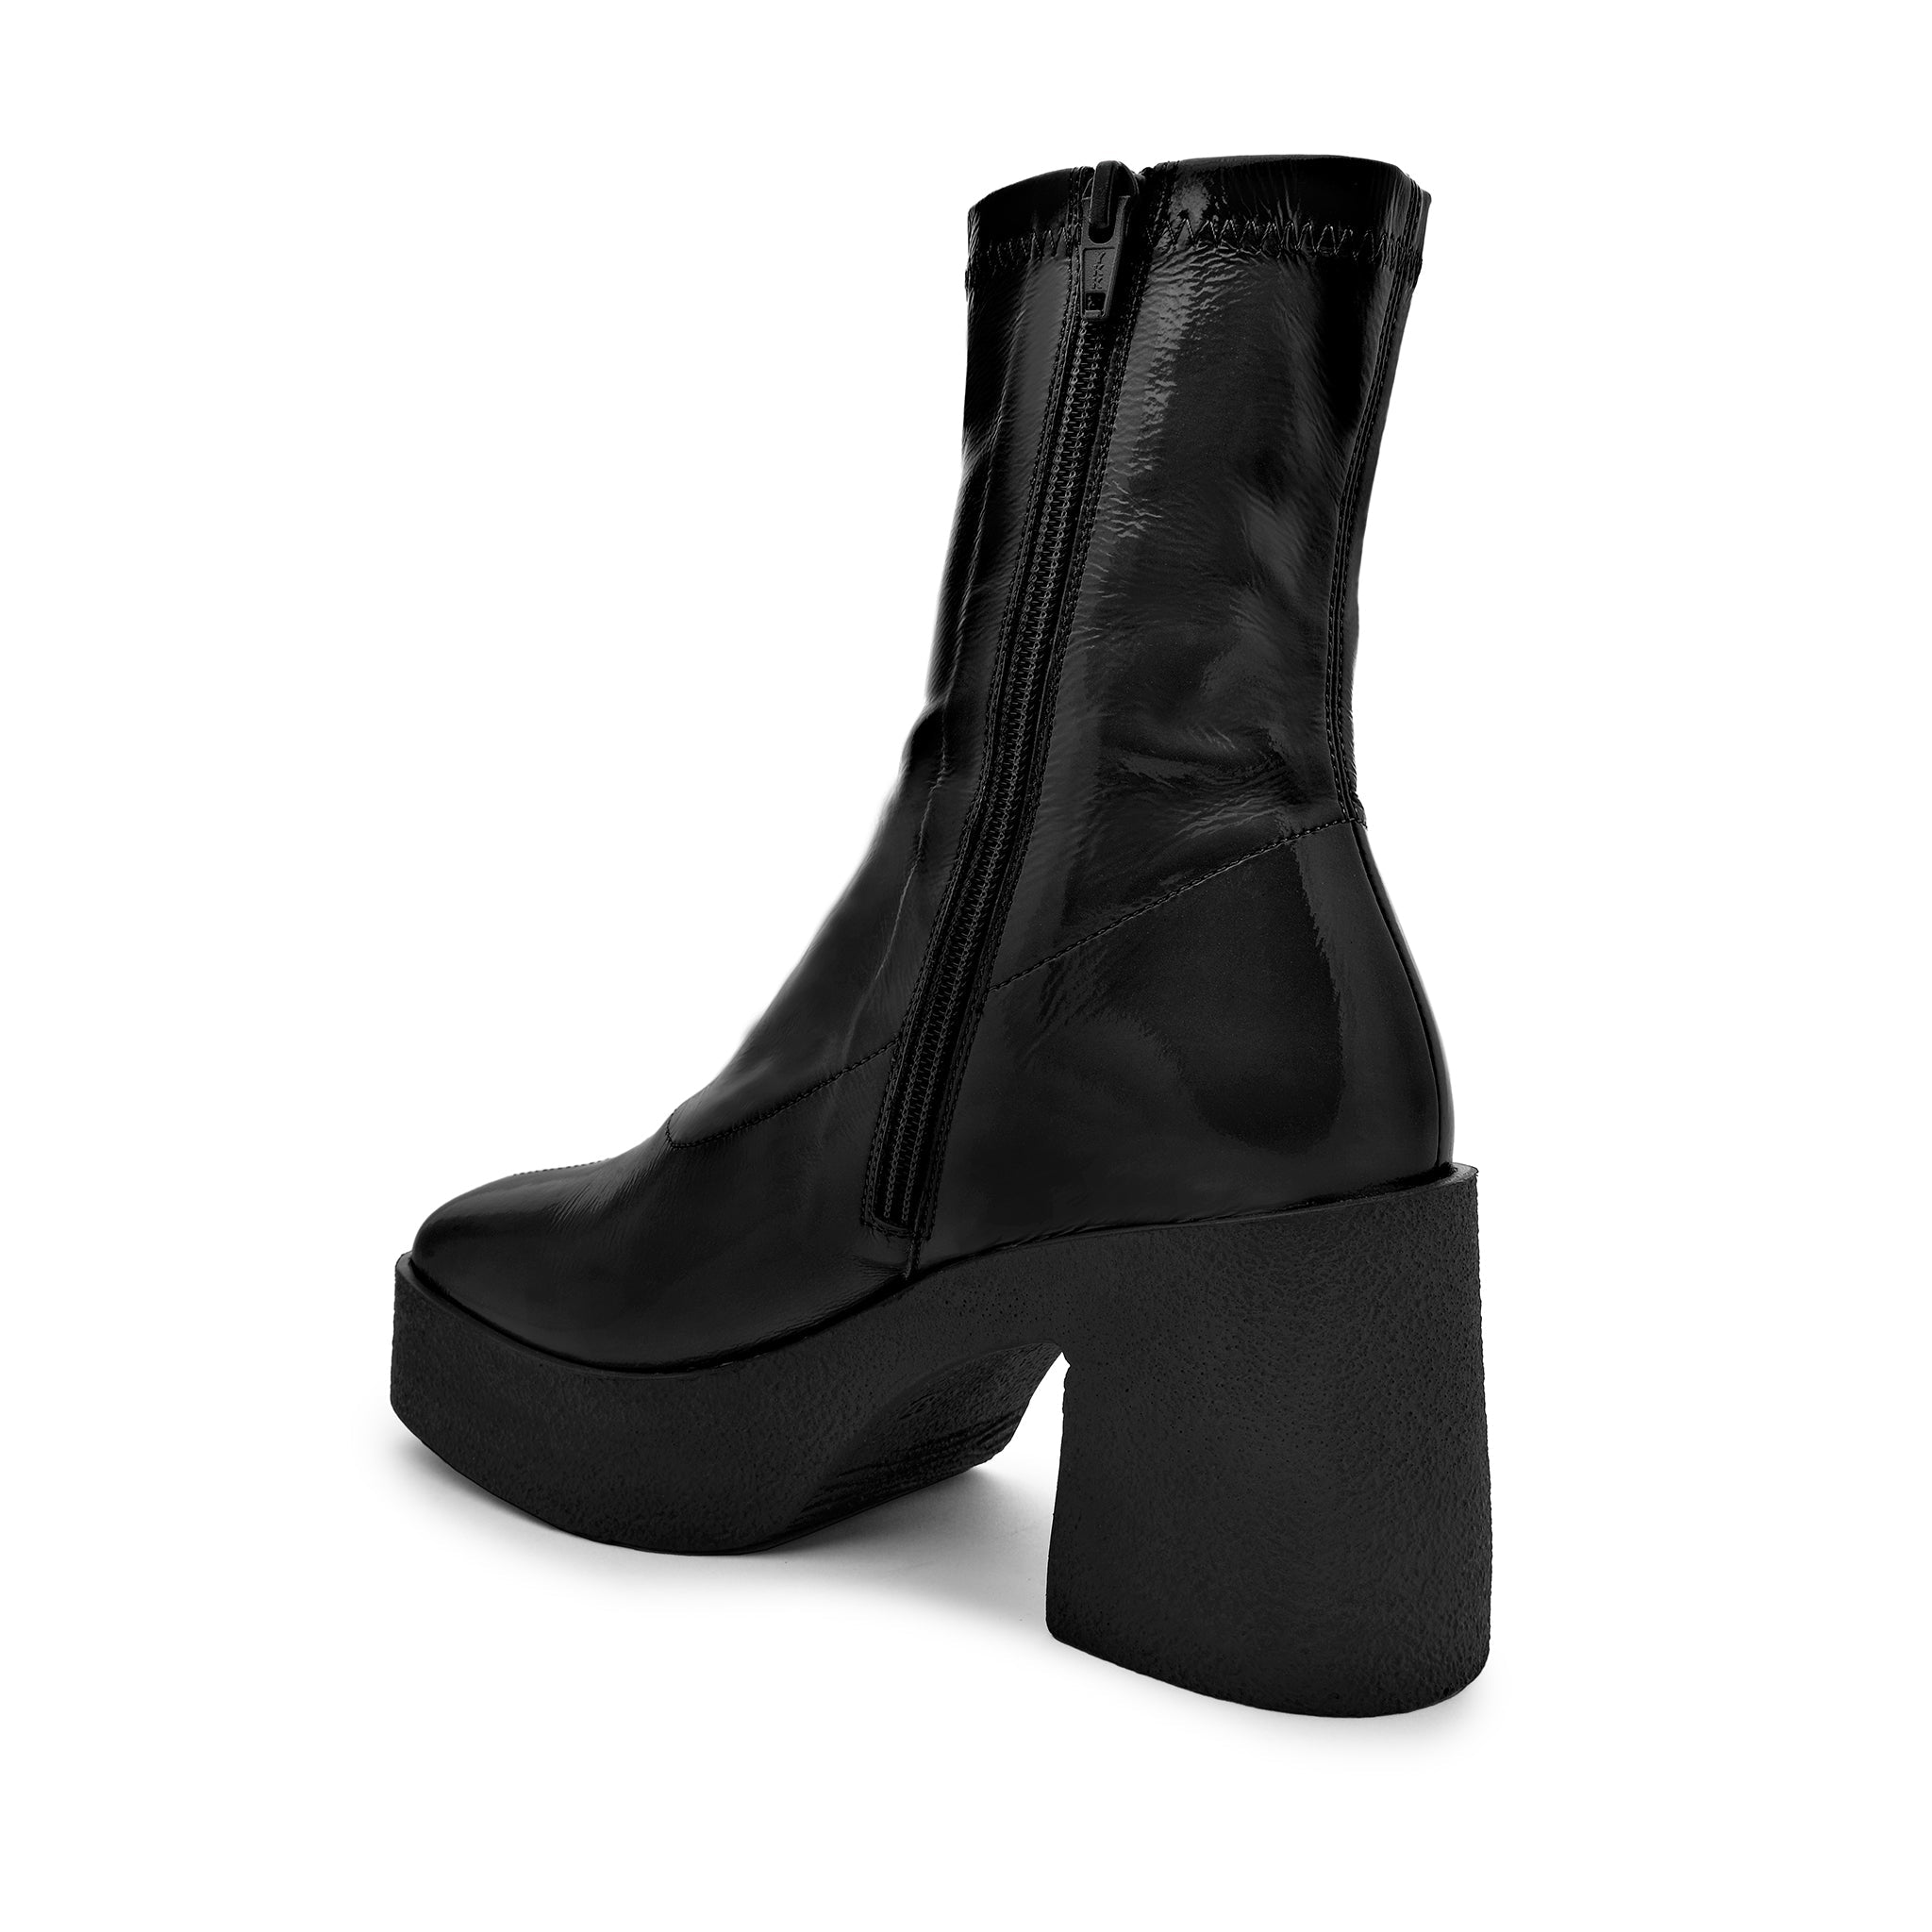 Umi Black Stretch Patent Chunky Ankle Boots 20077-02-12 - 9